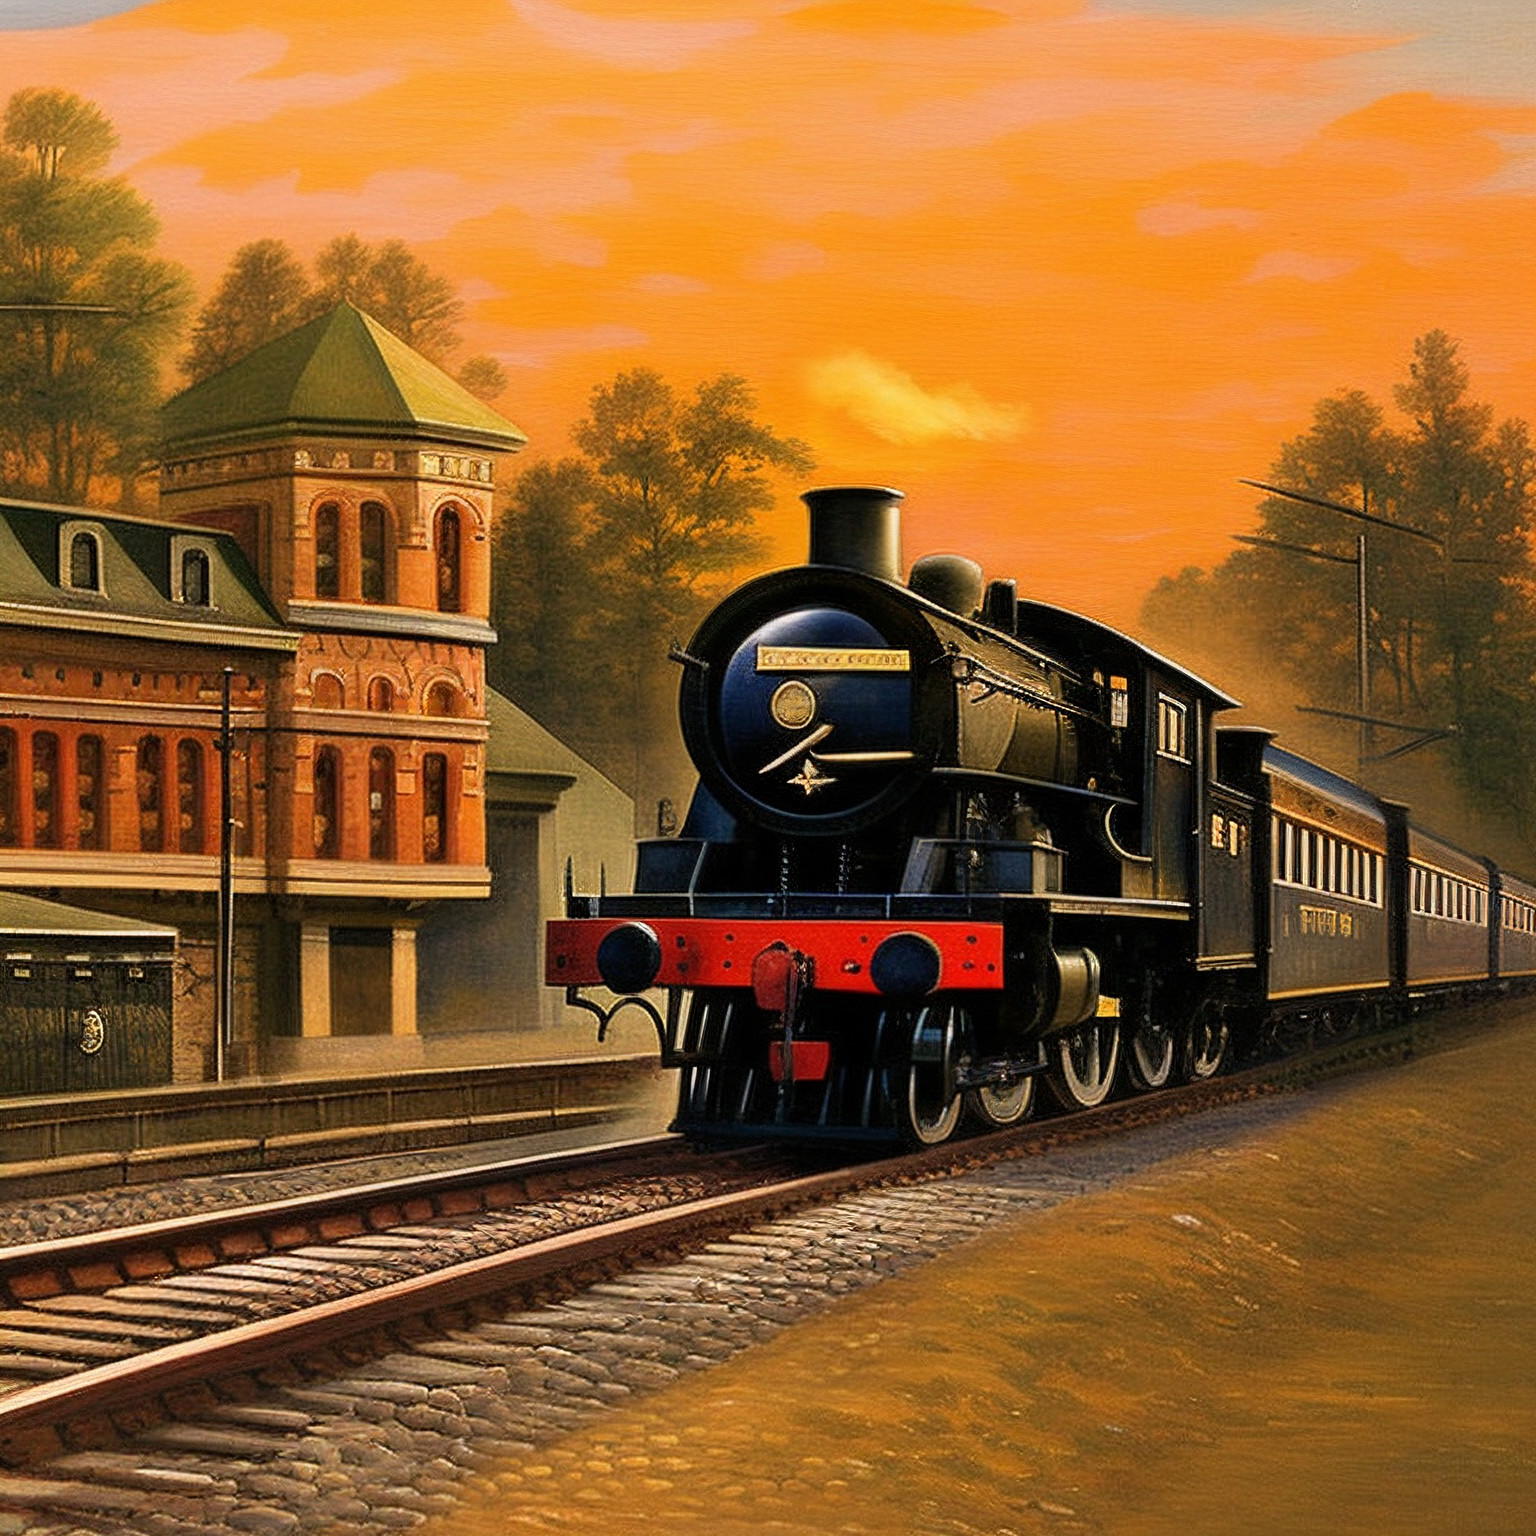 Final up-scaled image of a steam engine leaving the trainstation at sunset